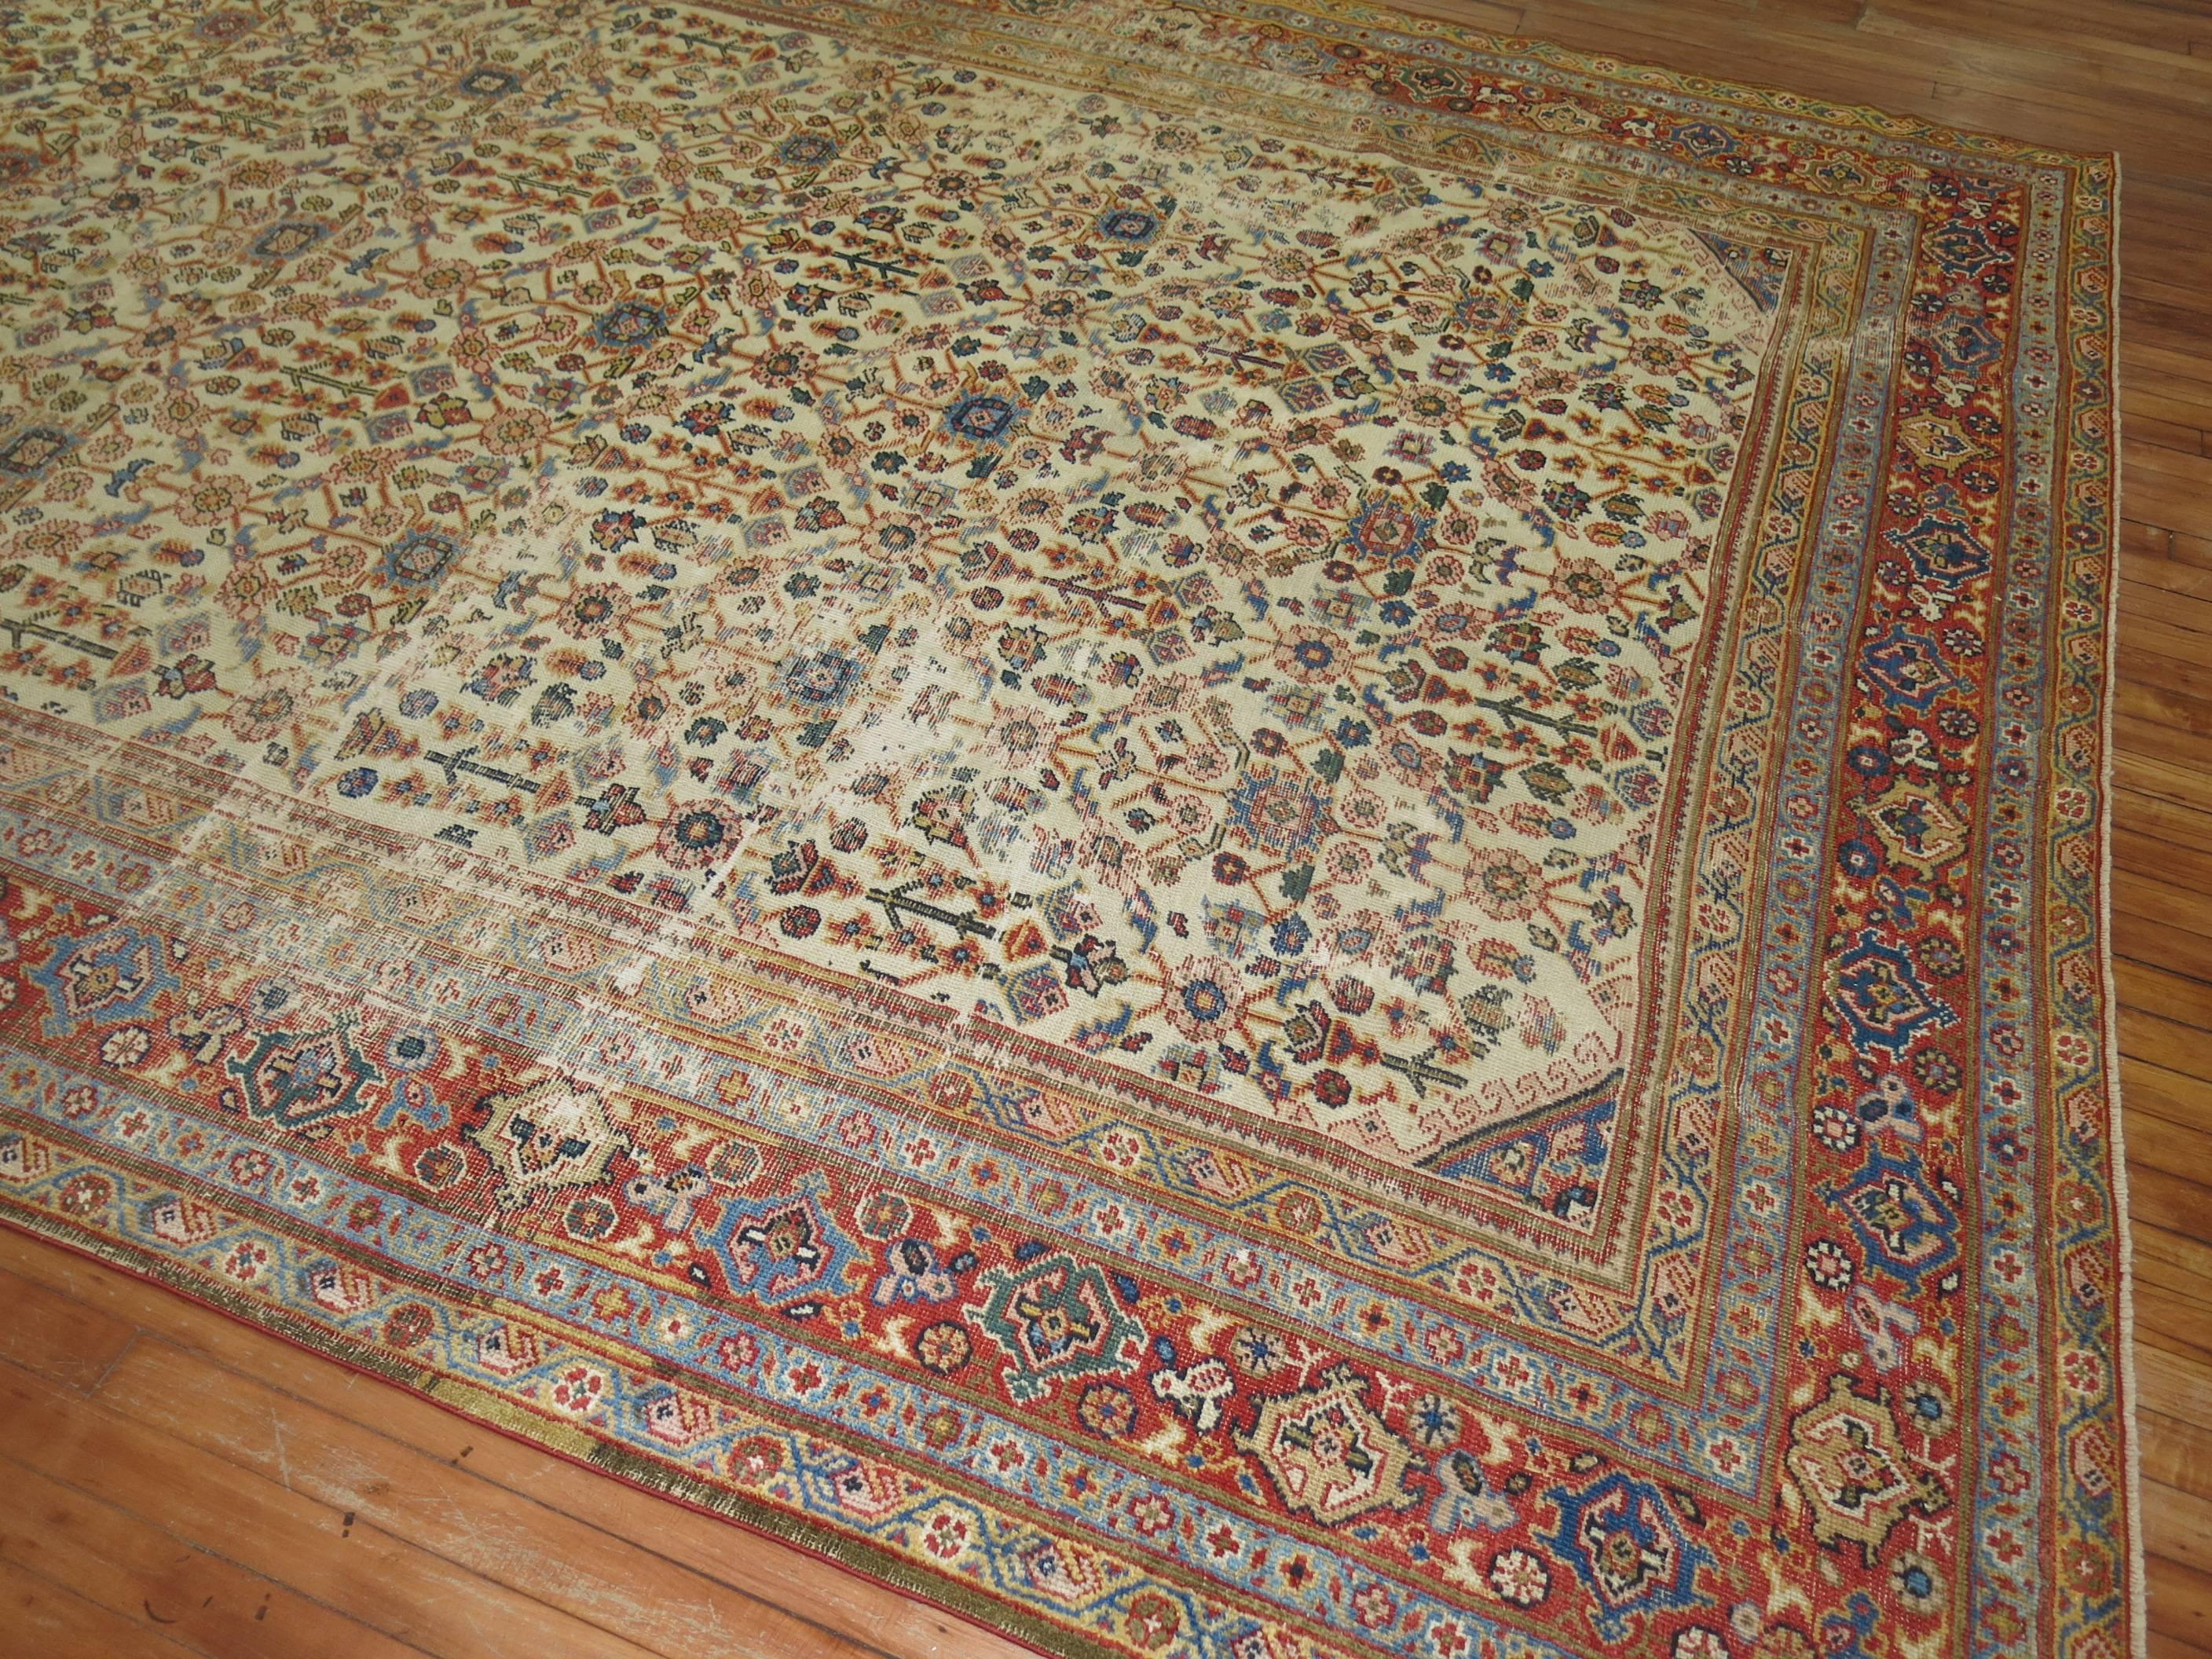 Worn Persian Room Size Oriental Early 20th Century Rug 3